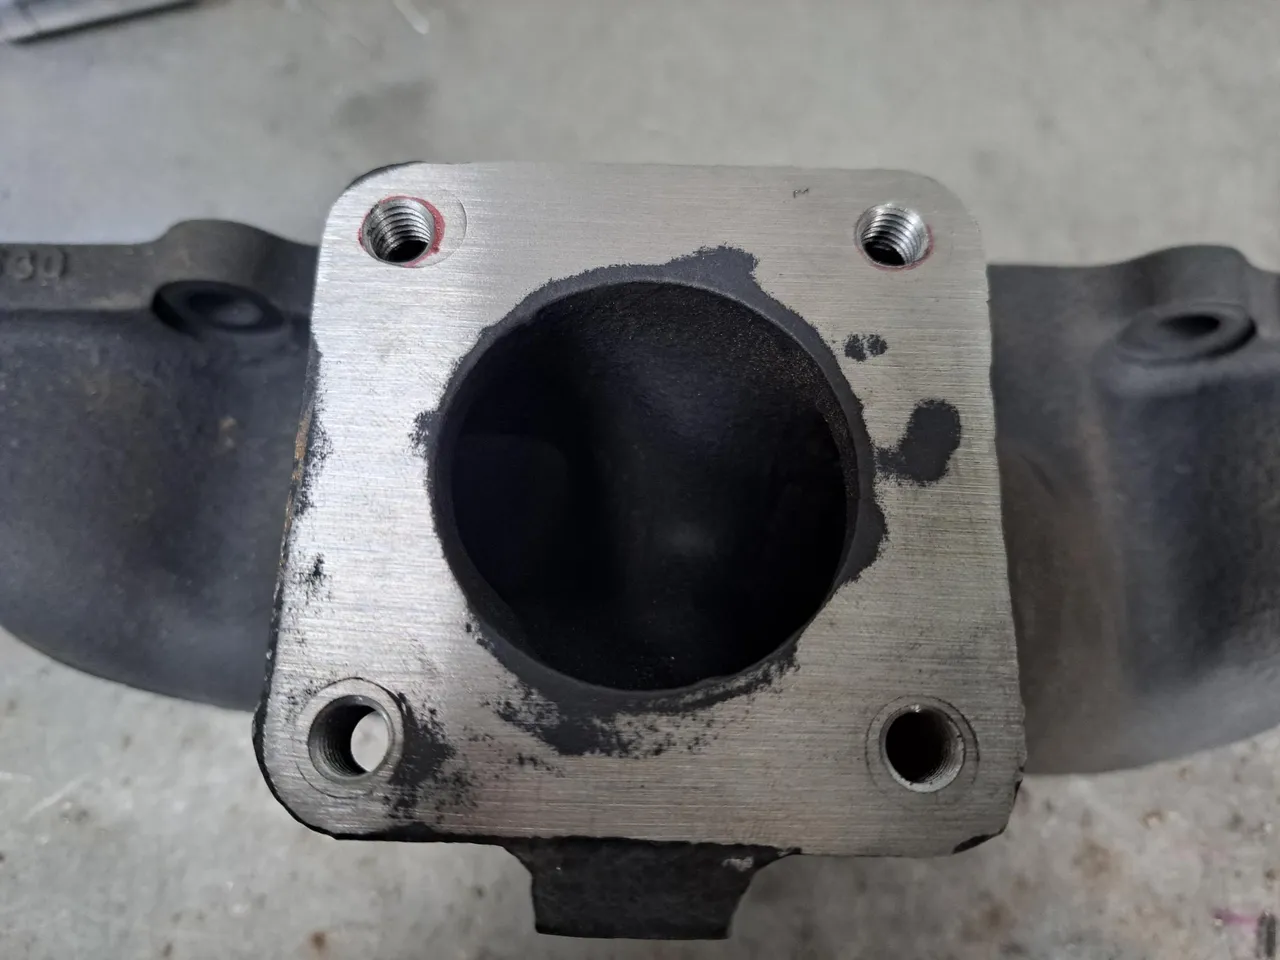 The turbo end of an exhaust manifold. It has been ground flush. The parts where it has been drilled out are visible via a tiny black outline, and these have had plugs rammed into them. Four M8-threaded holes have been drilled into it very precisely.